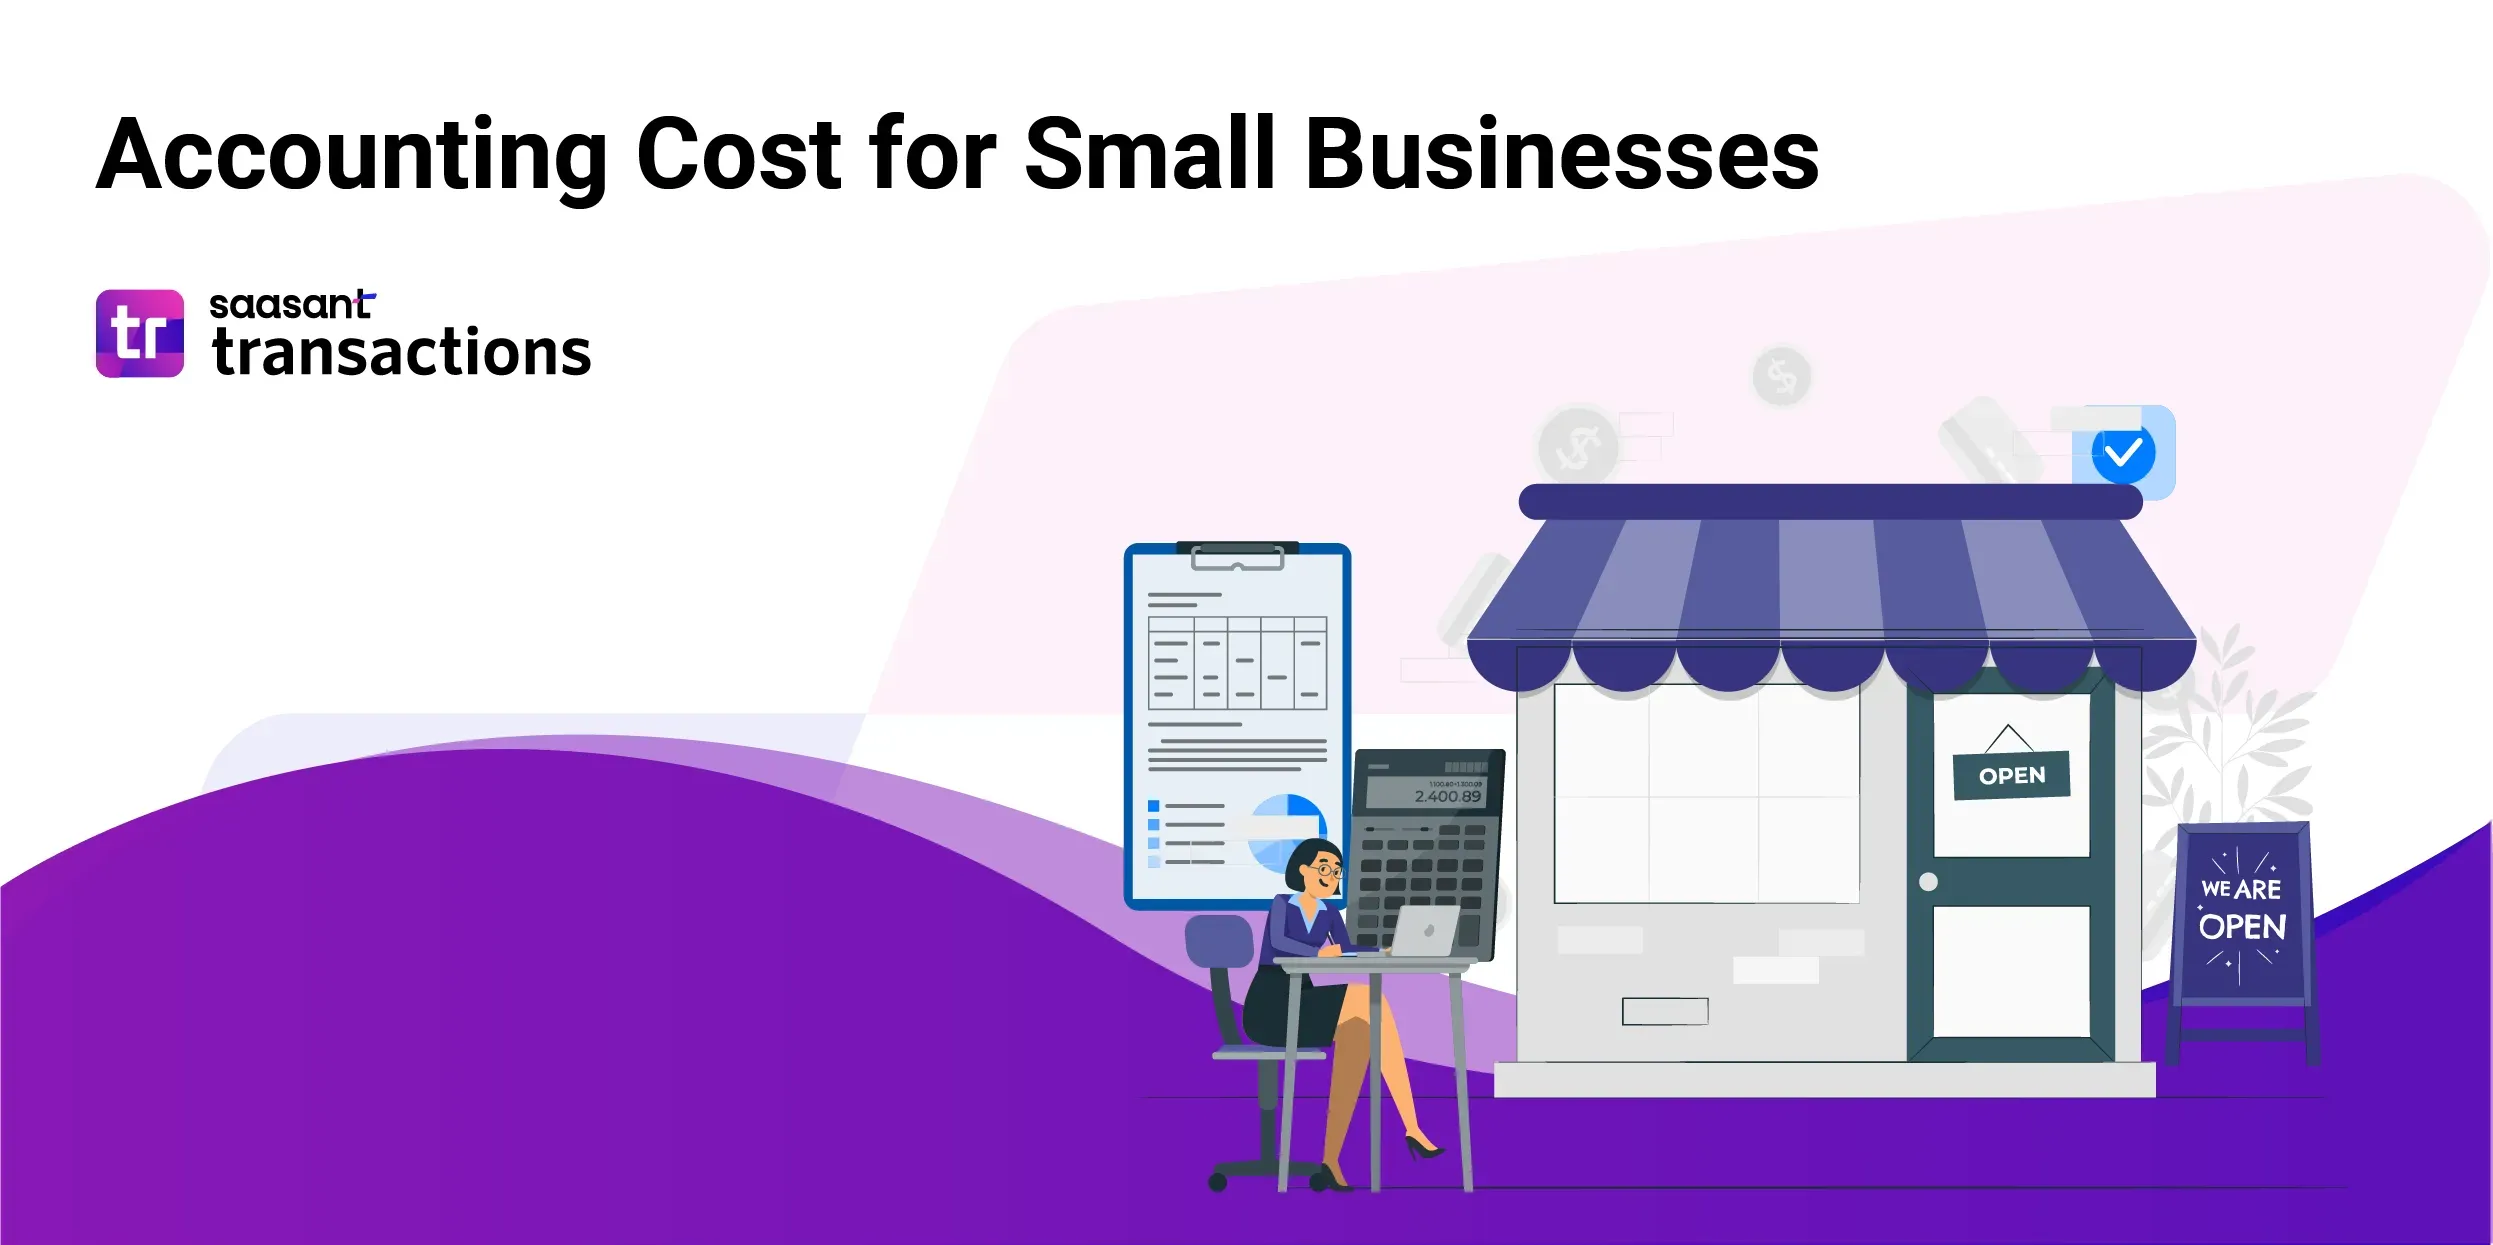 Accounting Cost for Small Businesses: What You Need to Know